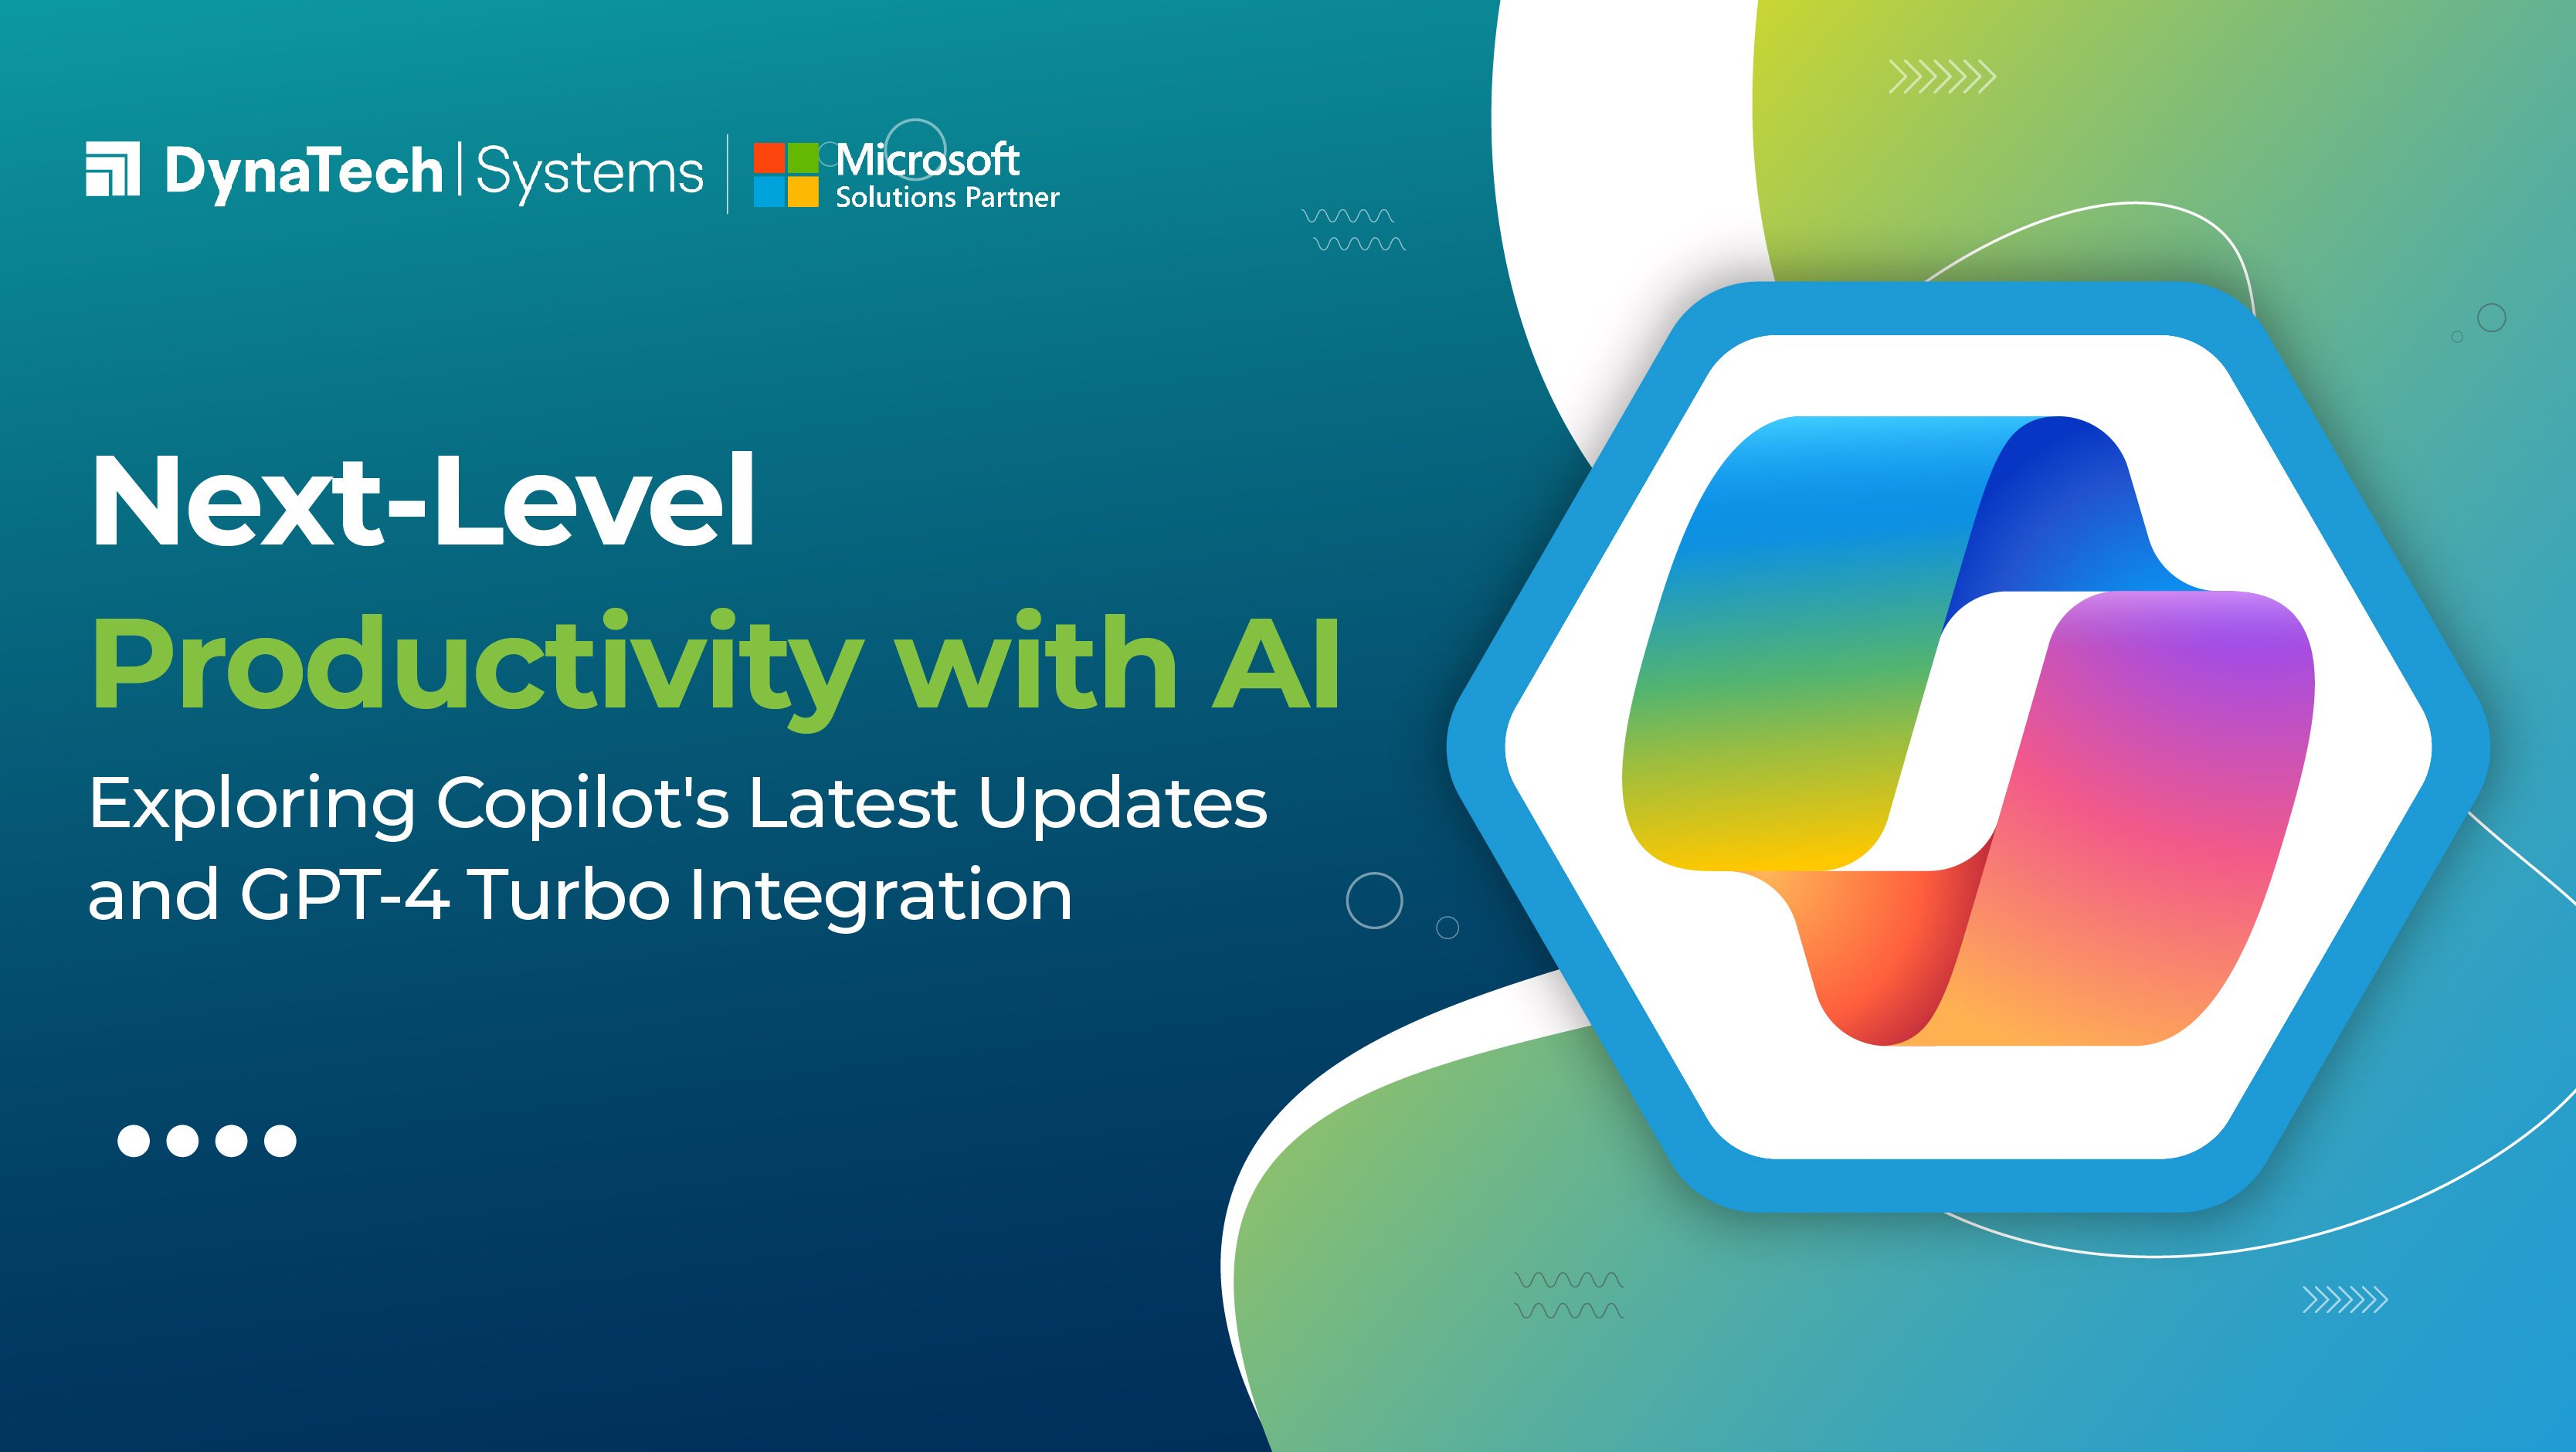 Next-Level Productivity with AI: Exploring Copilot's Latest Updates and GPT-4 Turbo Integration